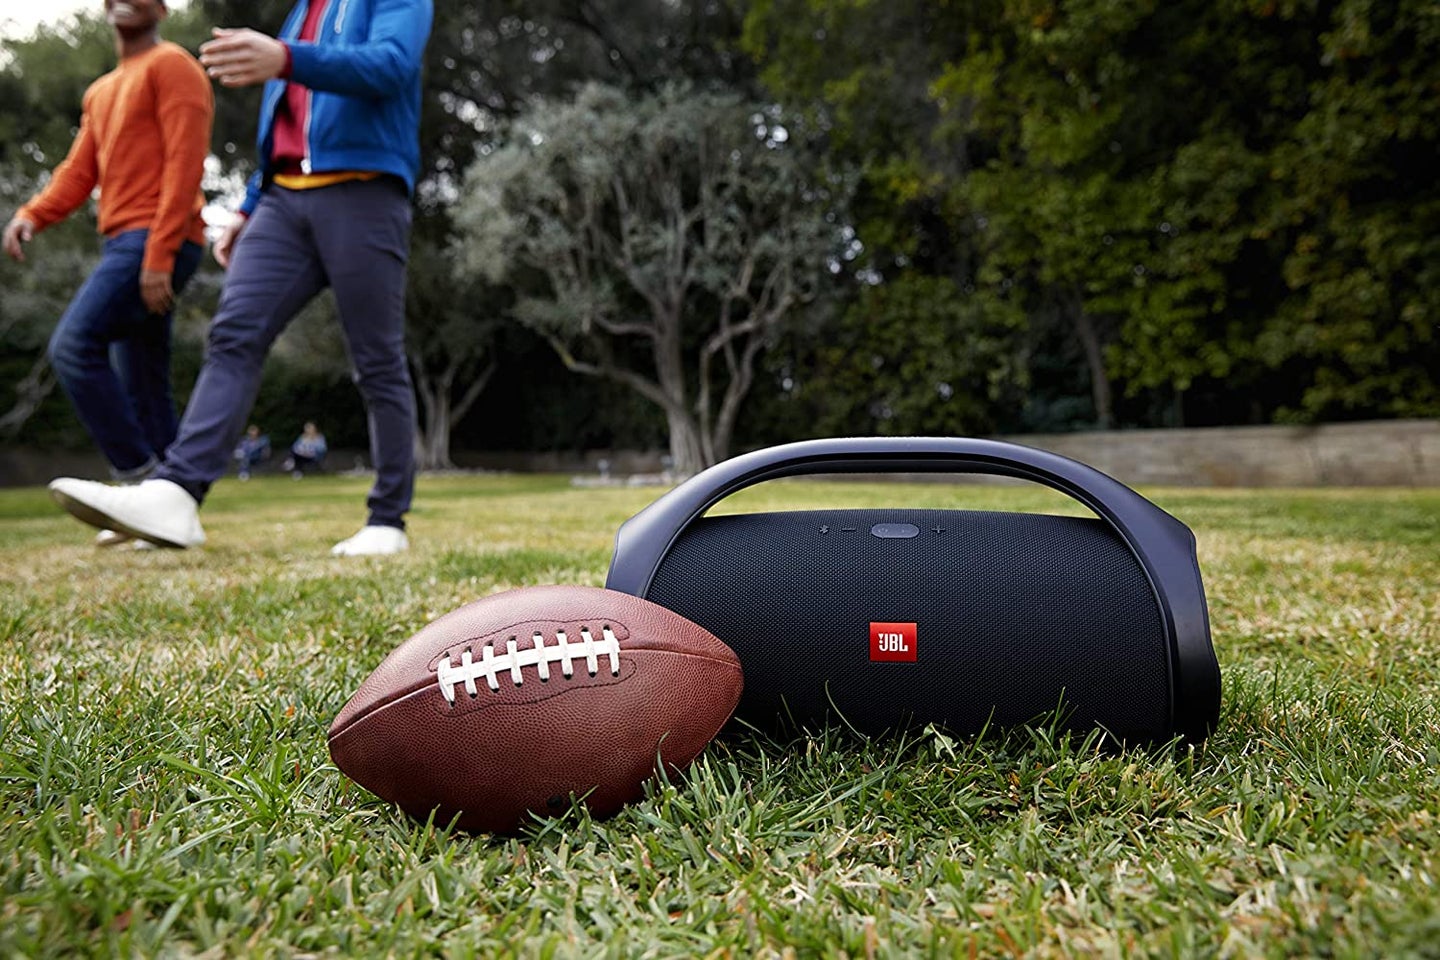 Bluetooth speaker and football in the grass